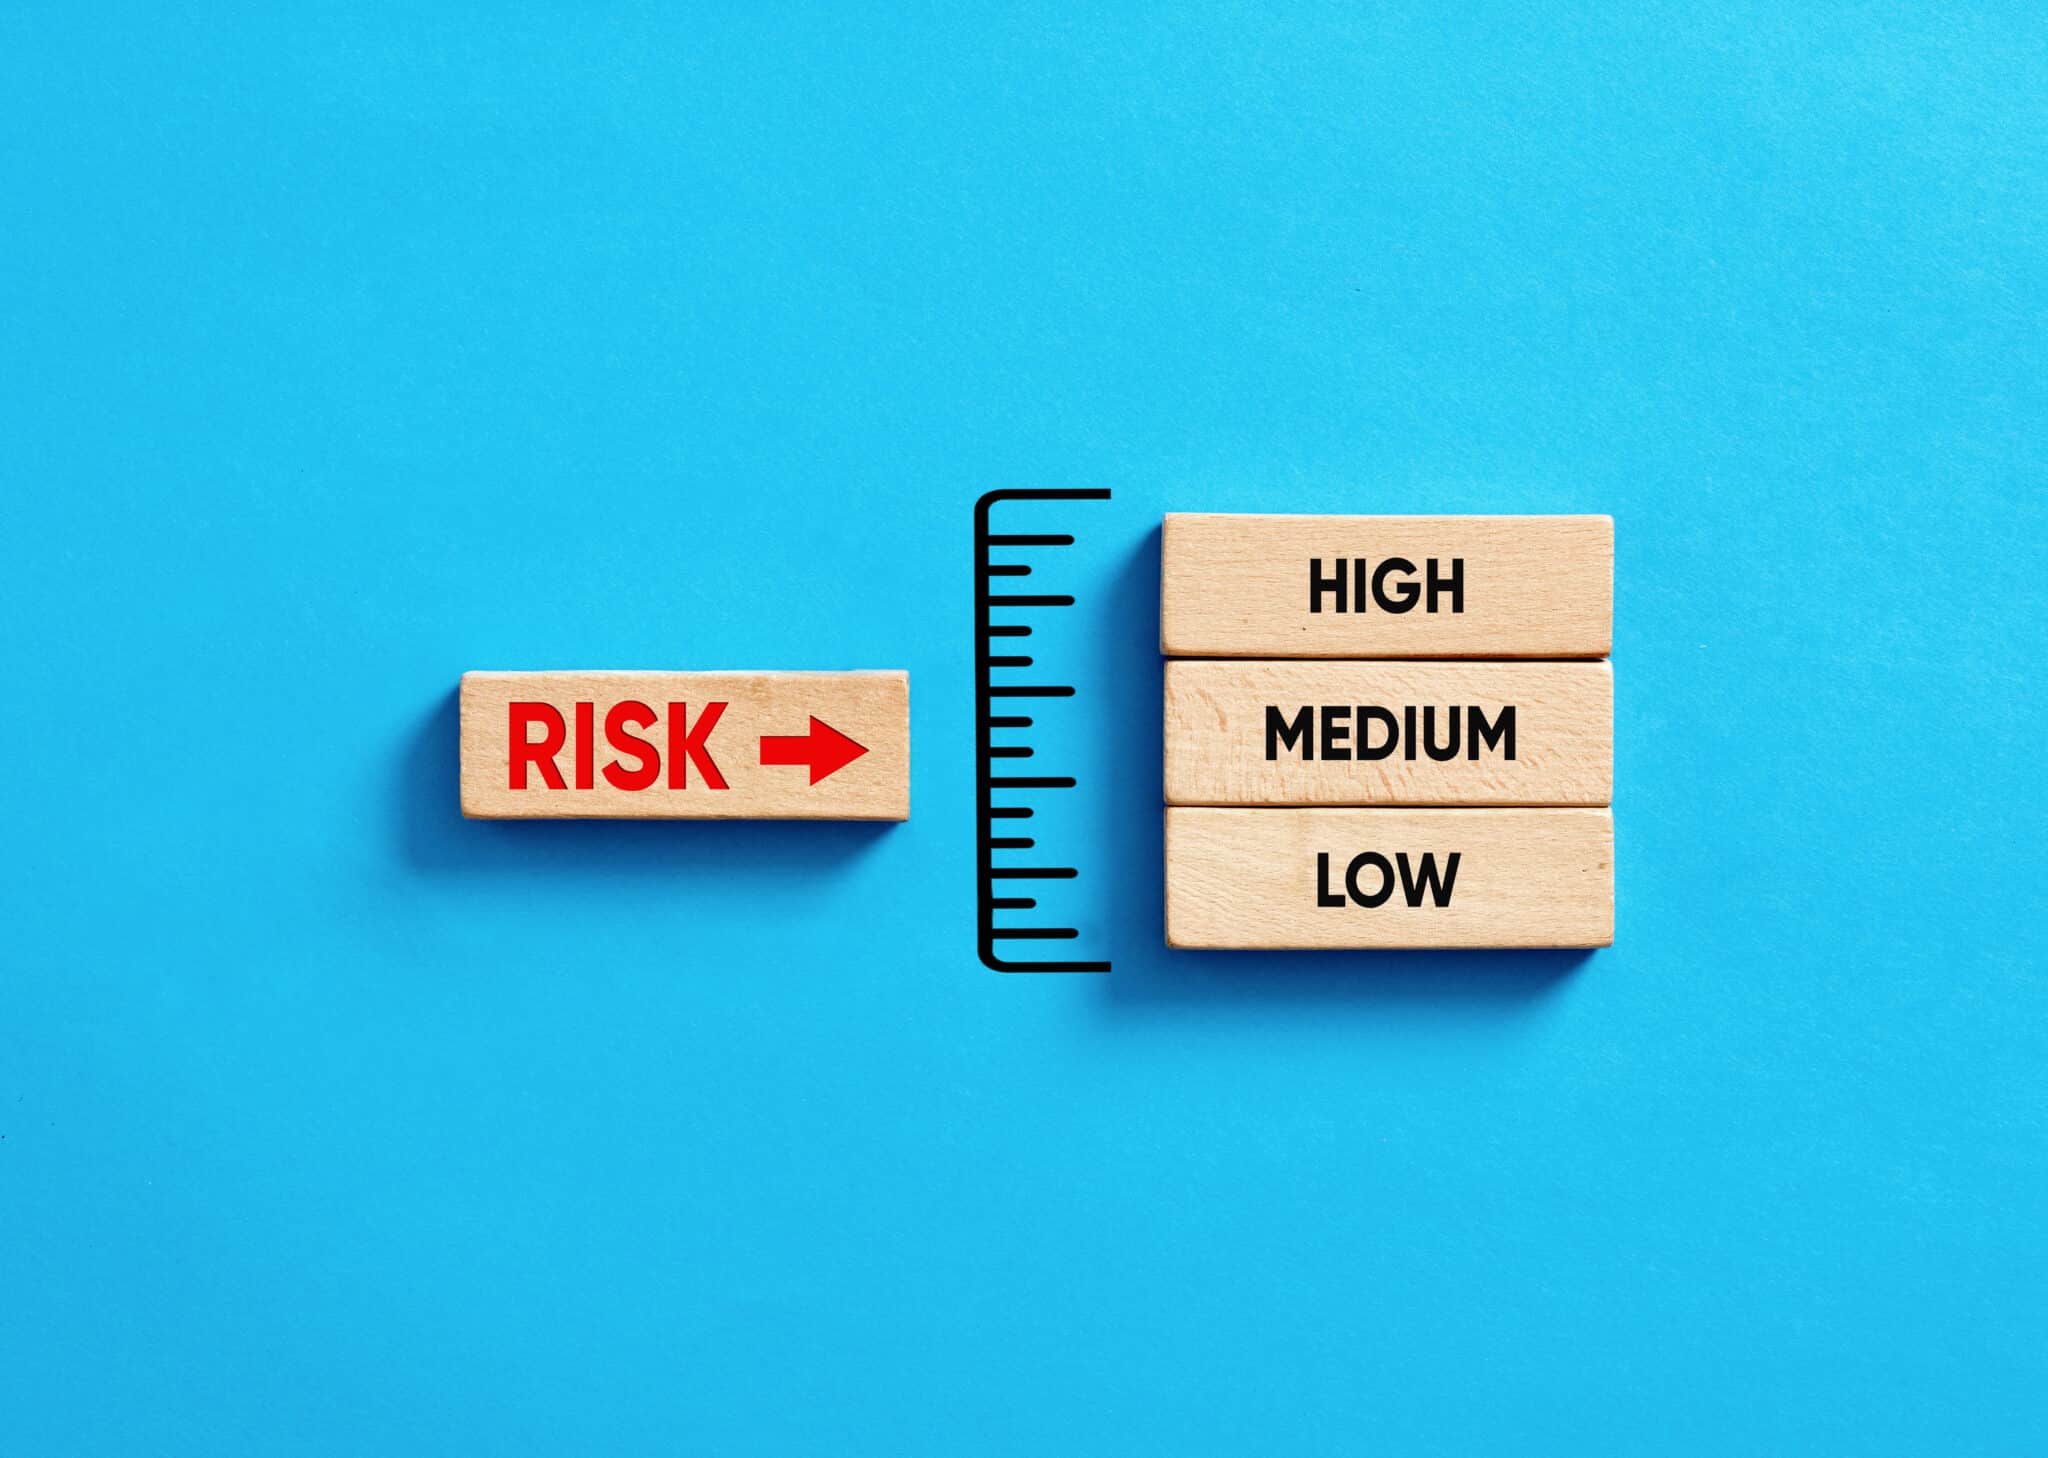 Business risk analysis measure, emphasizing Athreon's transcription service risk management.